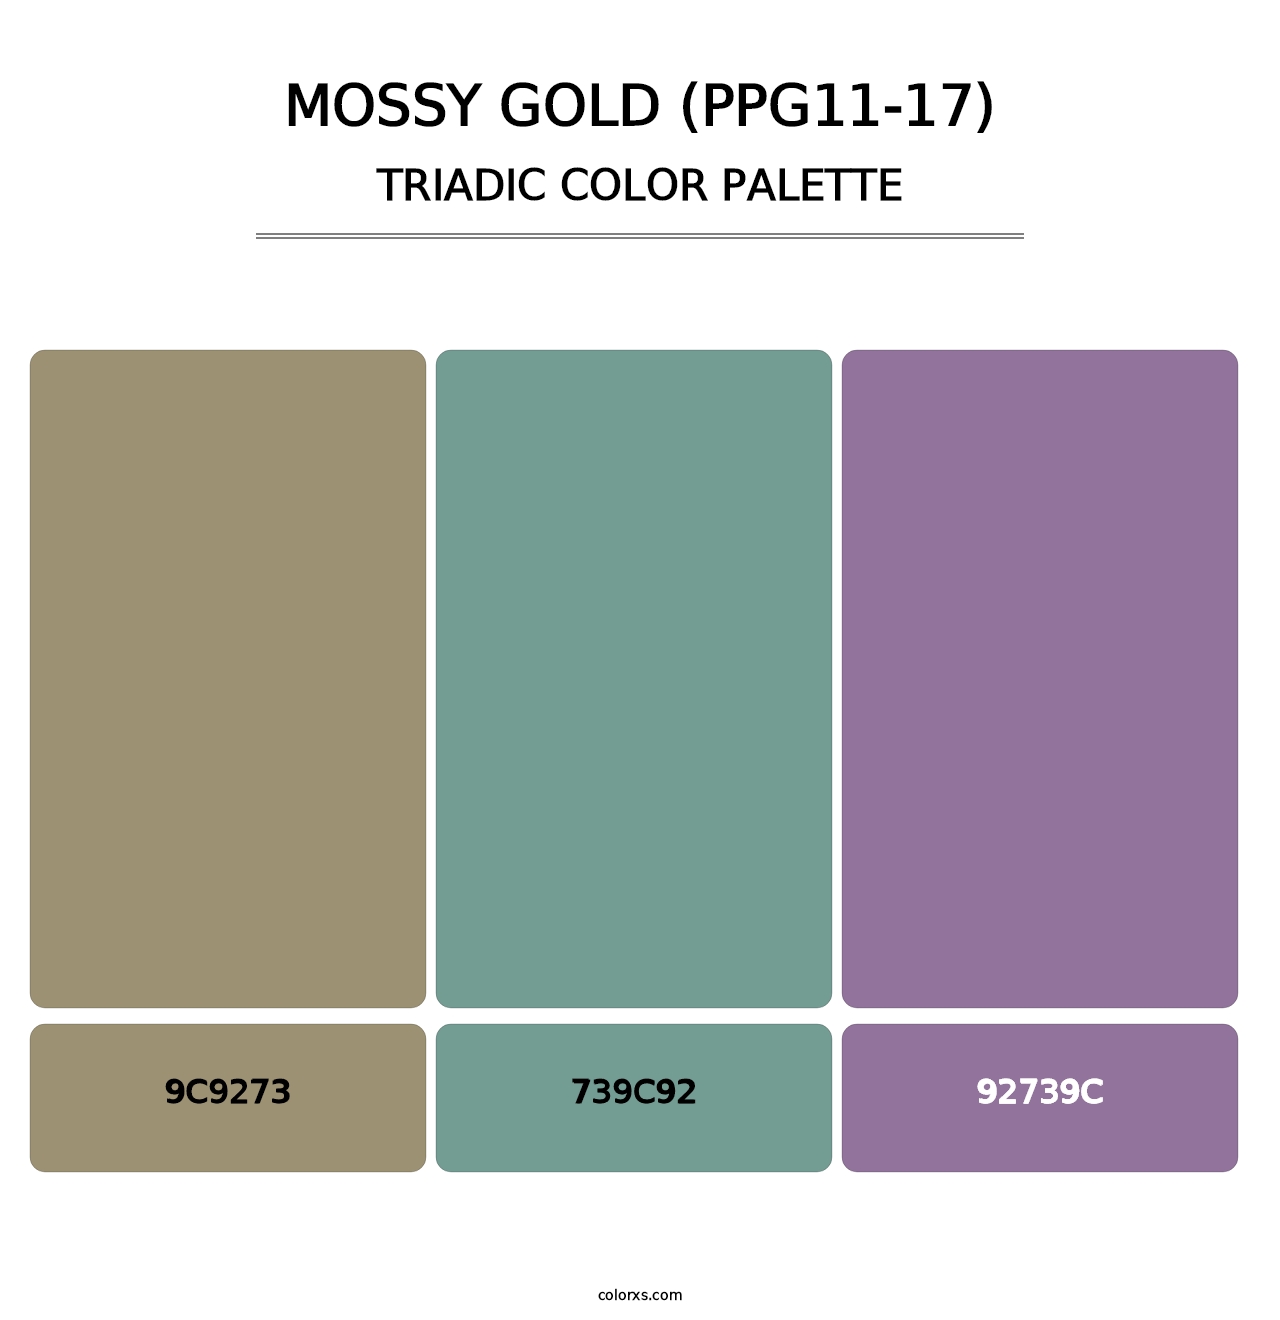 Mossy Gold (PPG11-17) - Triadic Color Palette